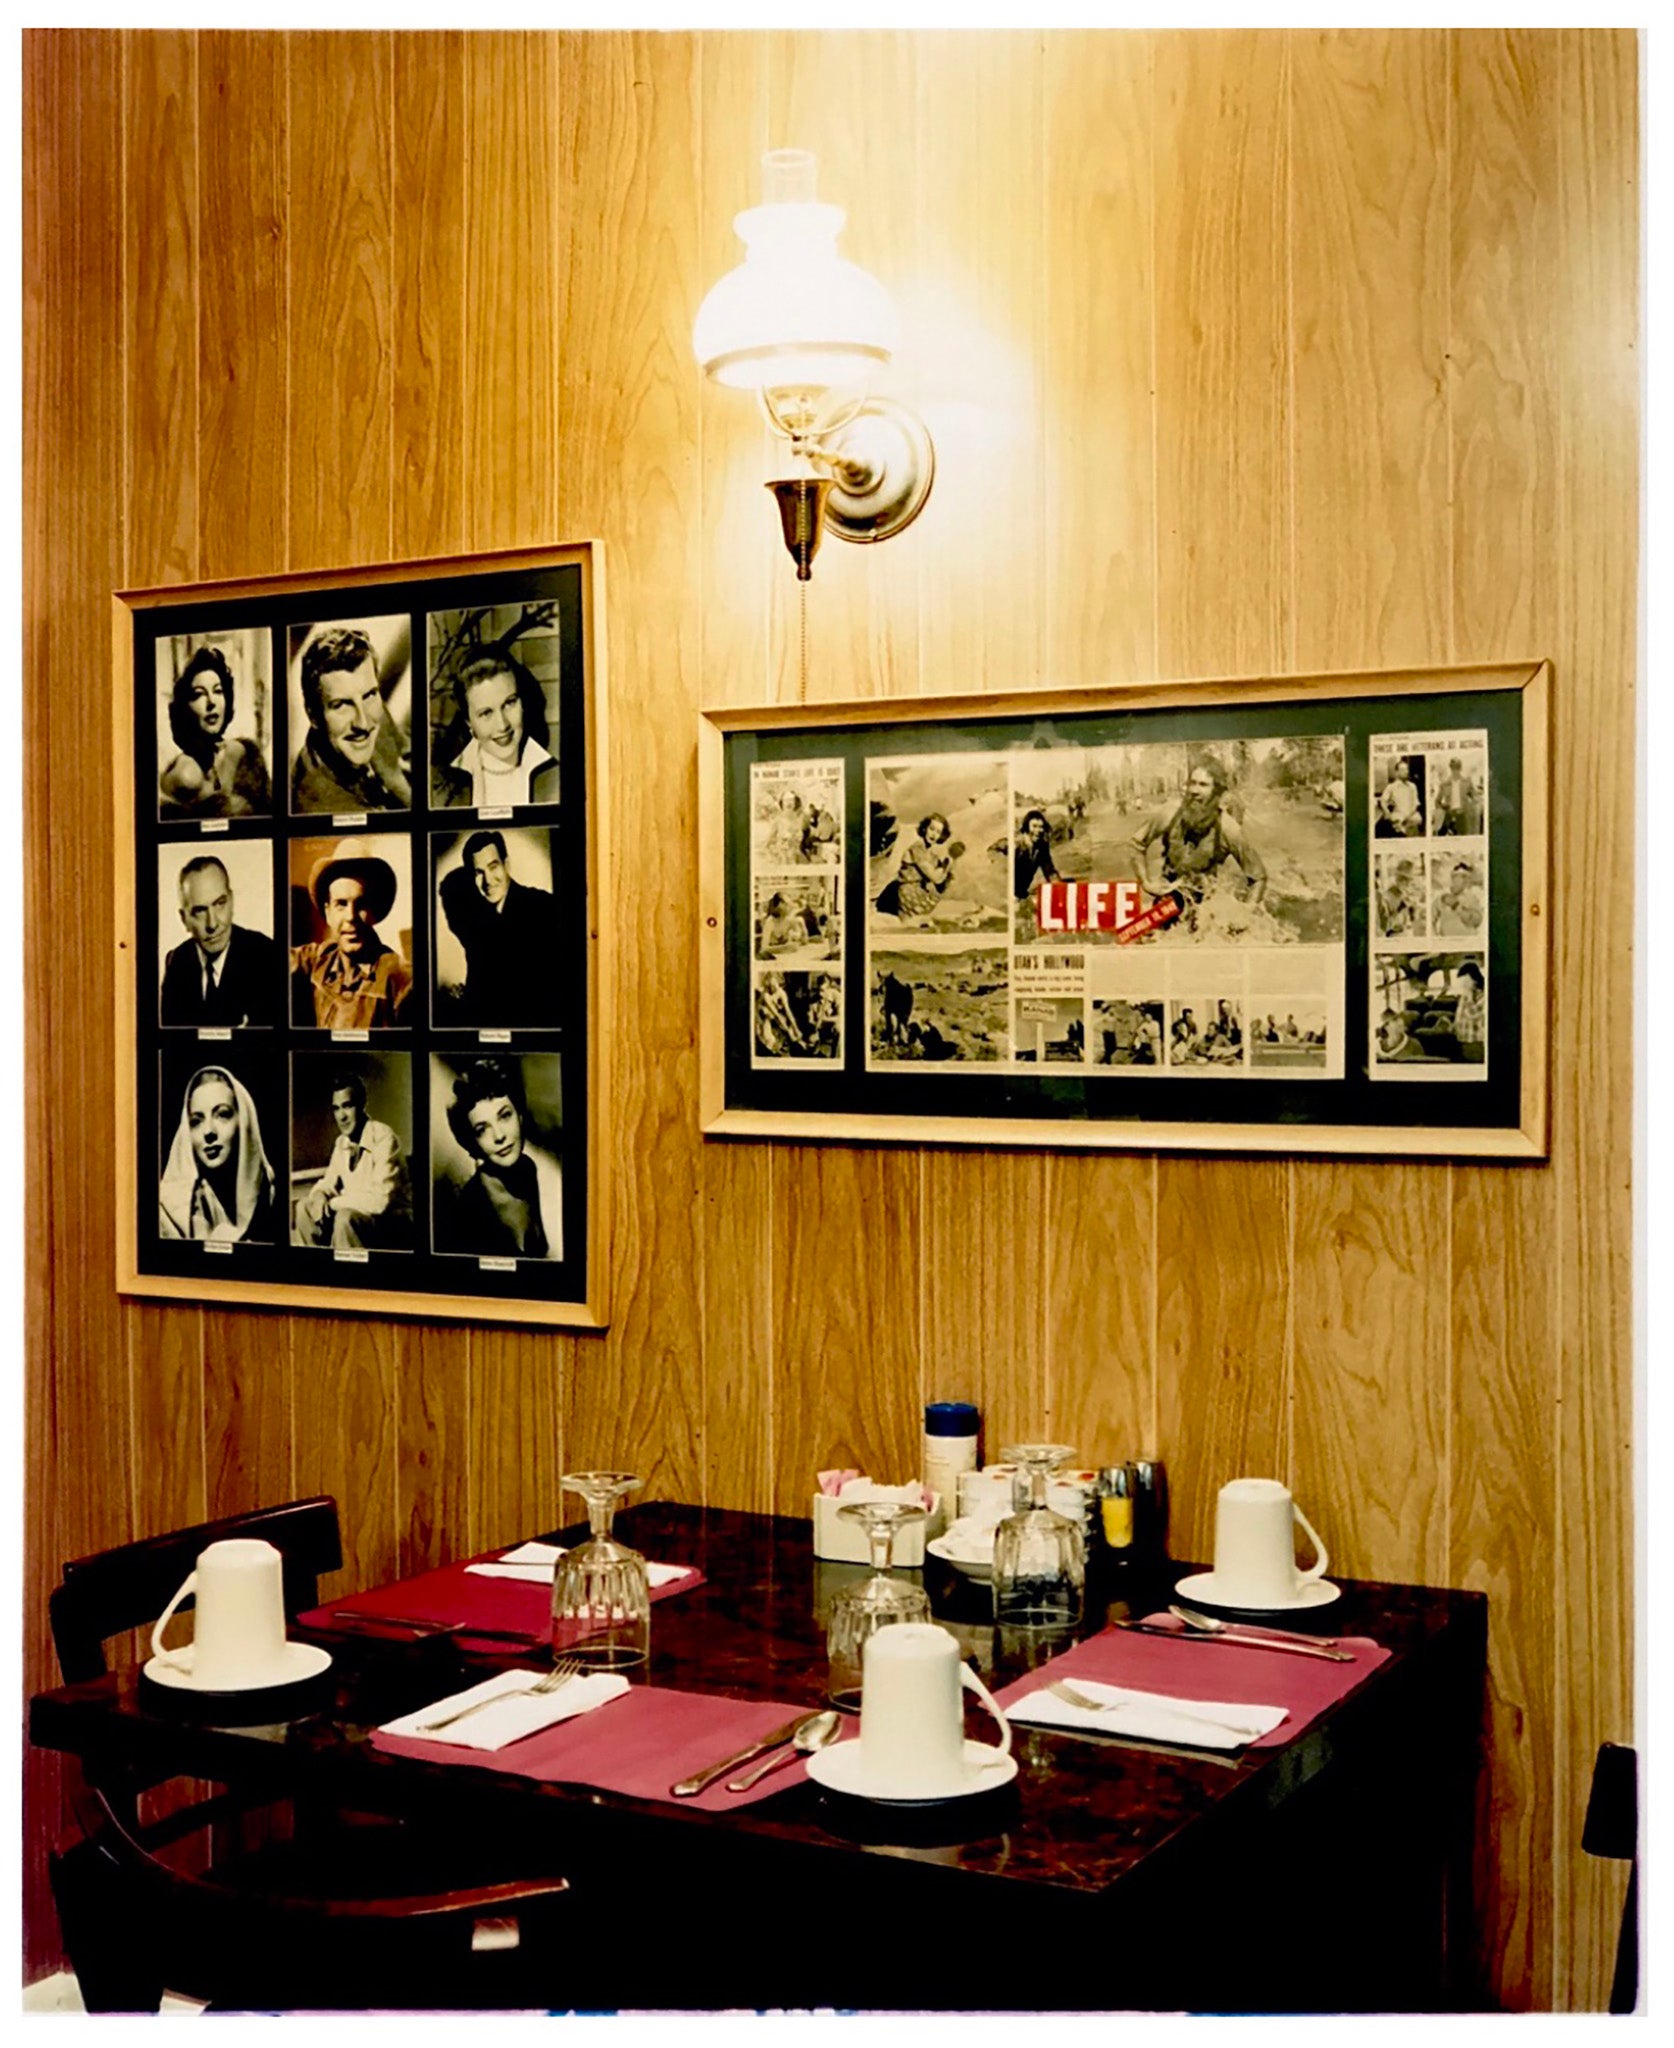 Photographed inside the iconic Parry Lodge that once hosted movie stars of the Western films made in the area, now the walls adorn their faces in cutouts from Life Magazine. The vintage interior and wood panelled walls create a mid-century cinematic scene. Part of Richard Heeps' Dream in Colour series.